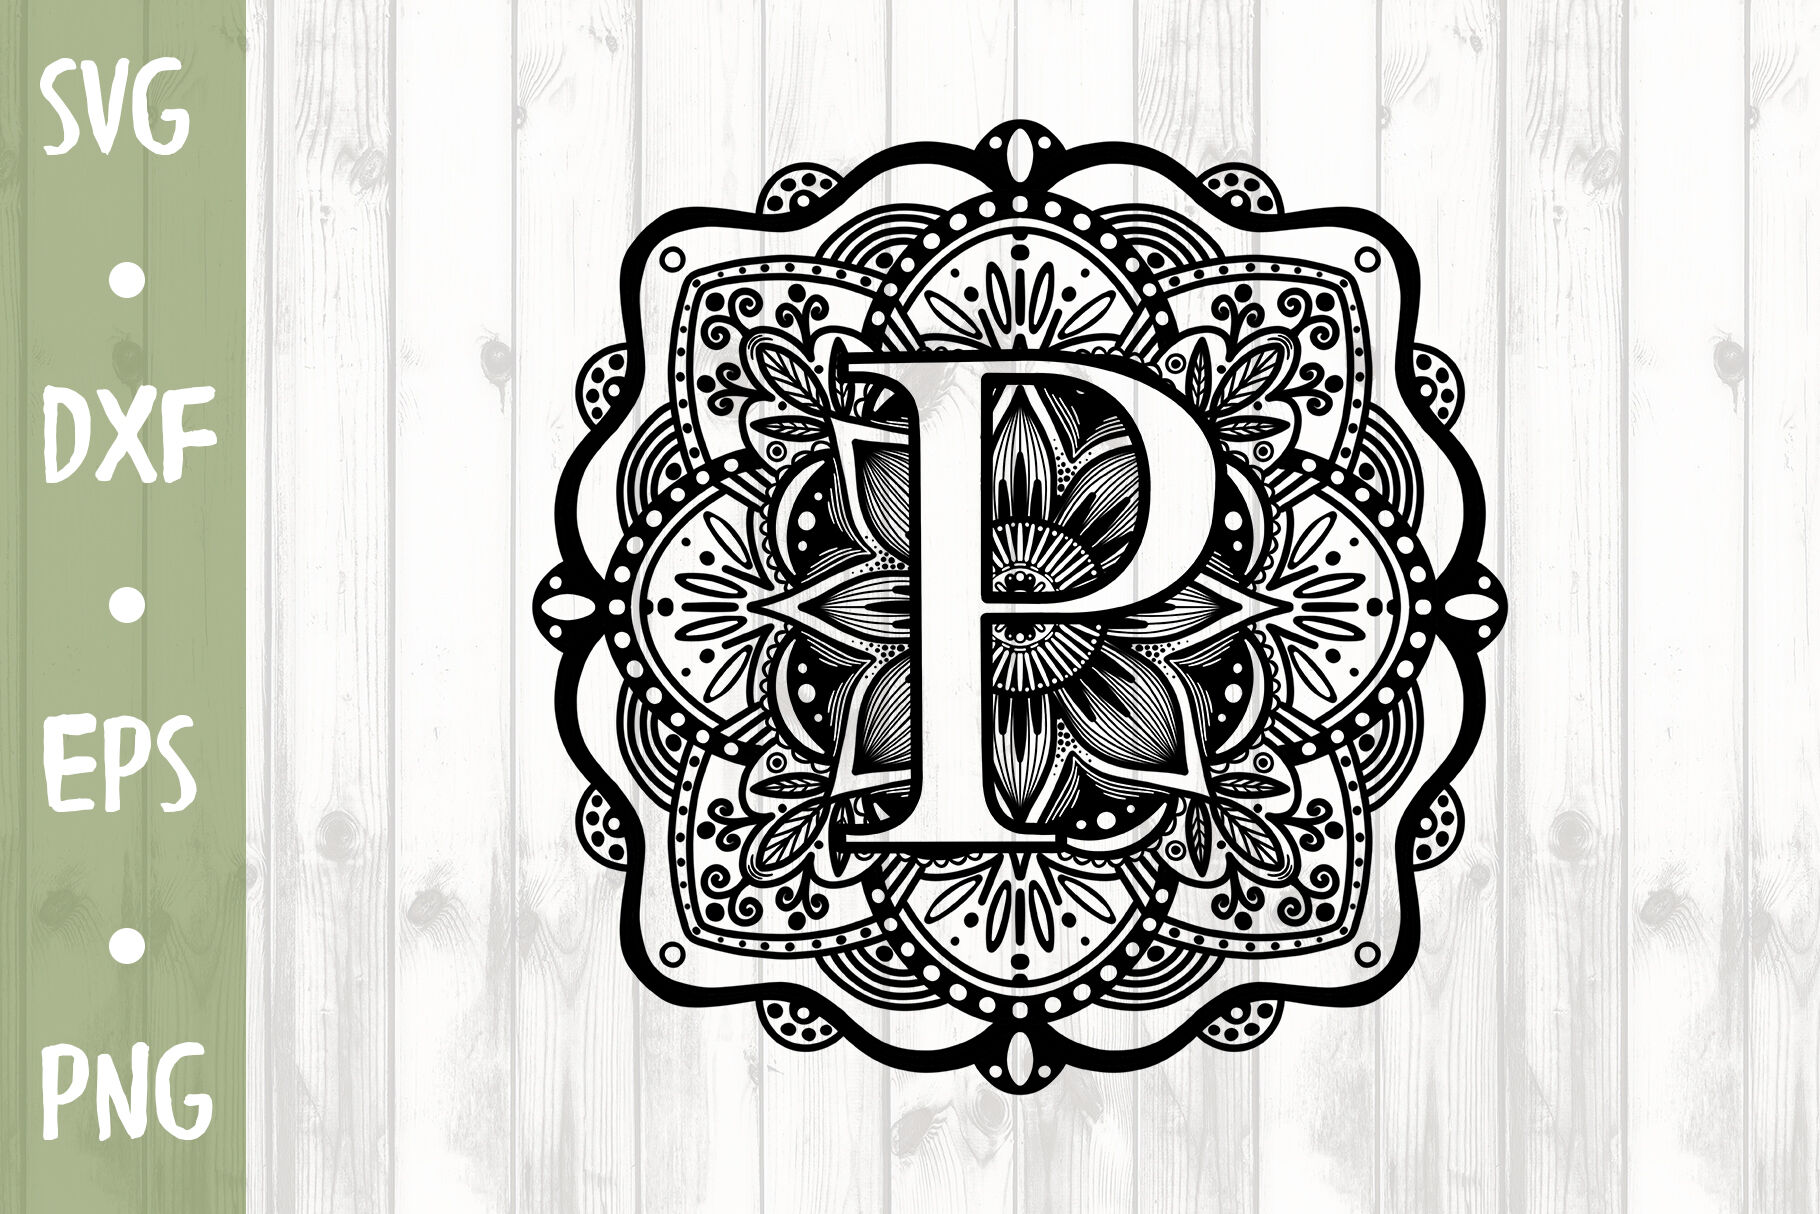 Download LETTER P SVG CUT FILE By Milkimil | TheHungryJPEG.com